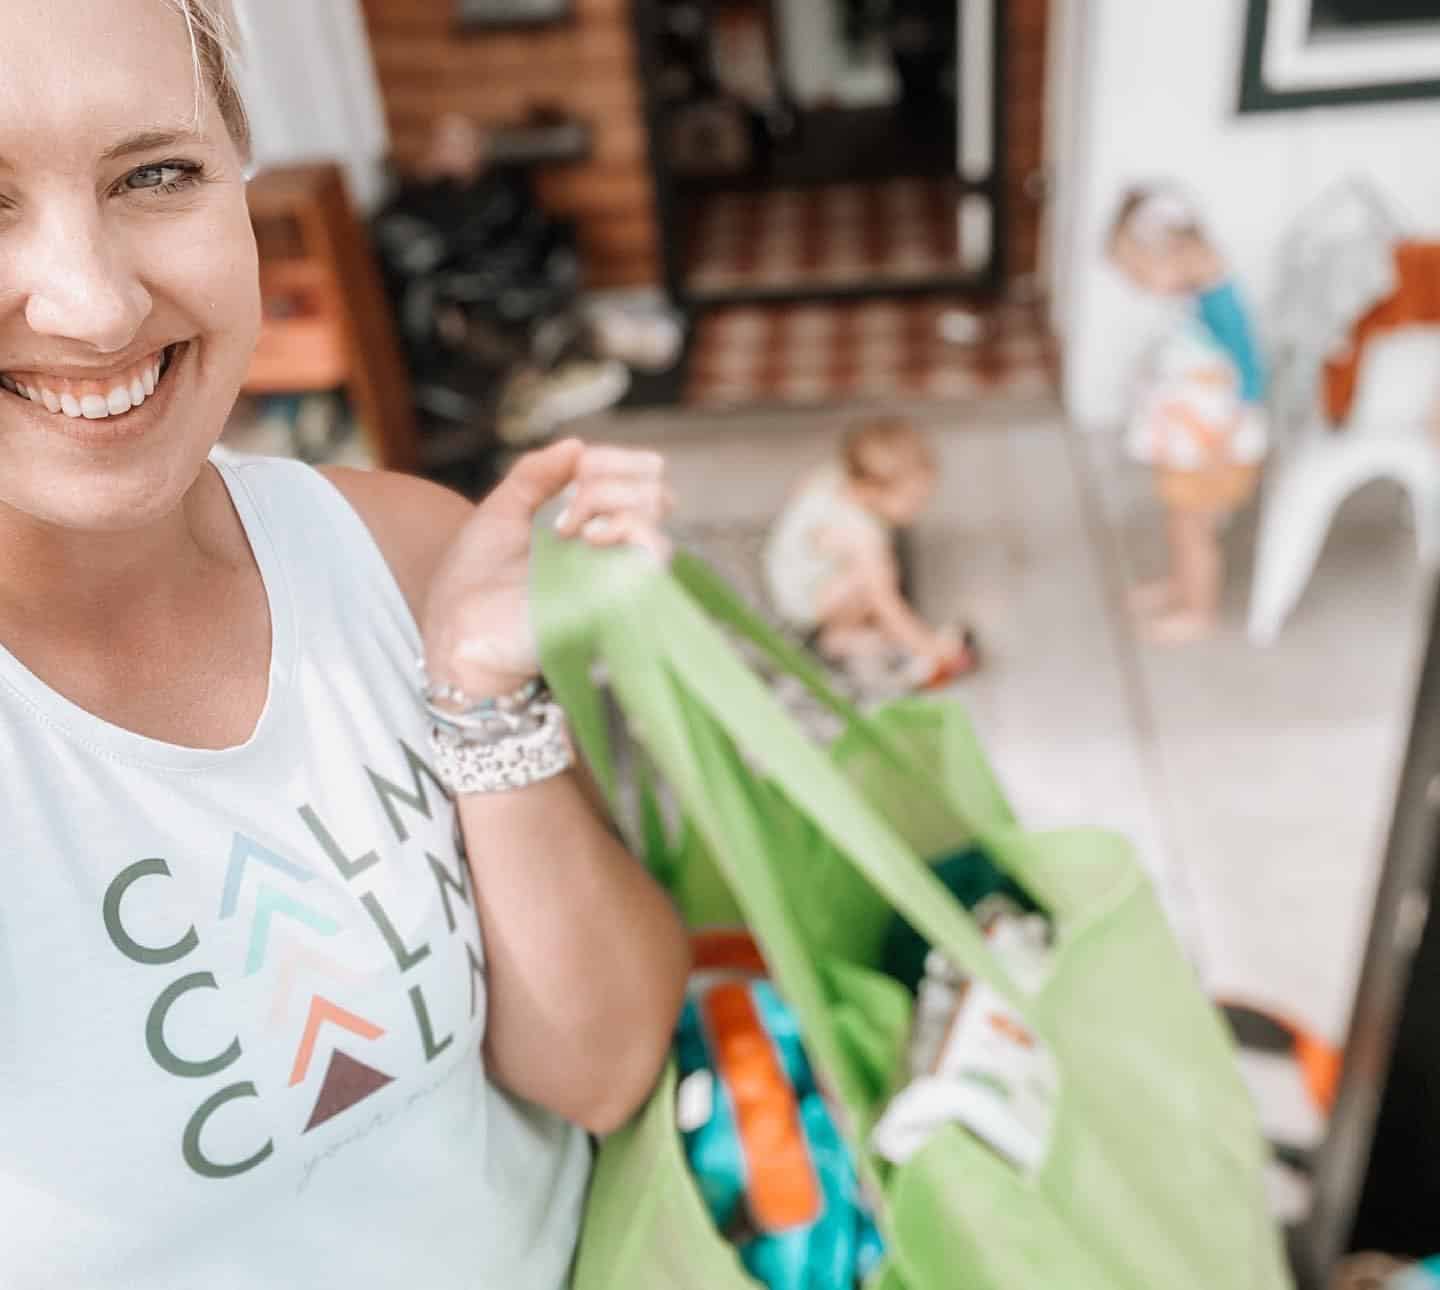 Brittany Clapp holds a canvas bag while smiling at the camera, with a couple of kids playing in the background